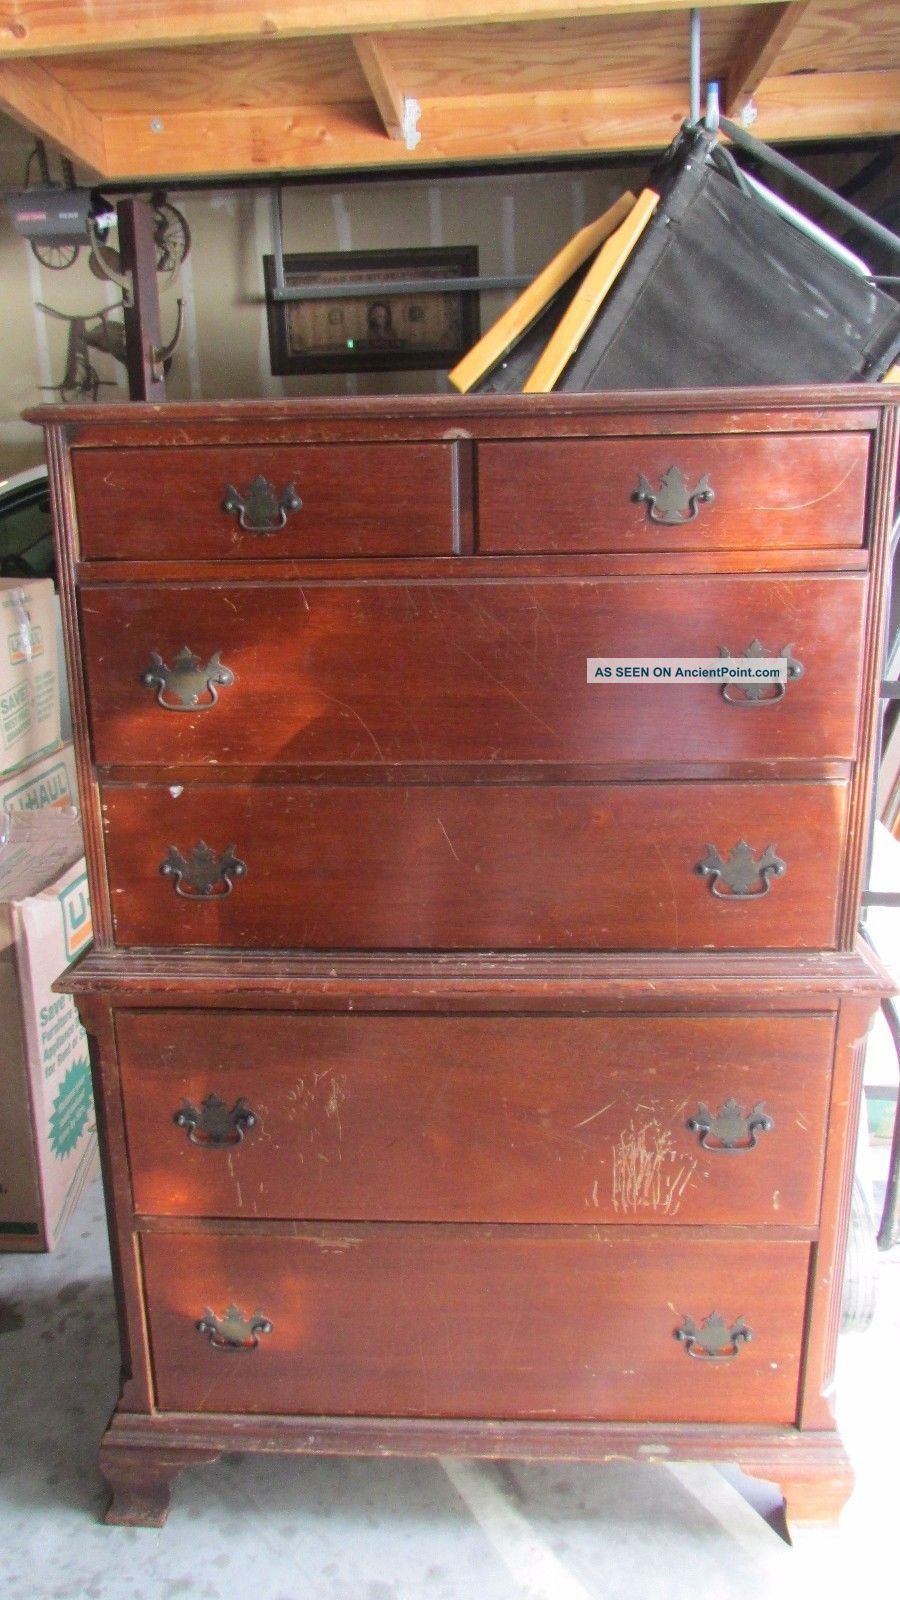 Early 20th Century American Highboy Dresser Solid Wood Construction 1900-1950 photo